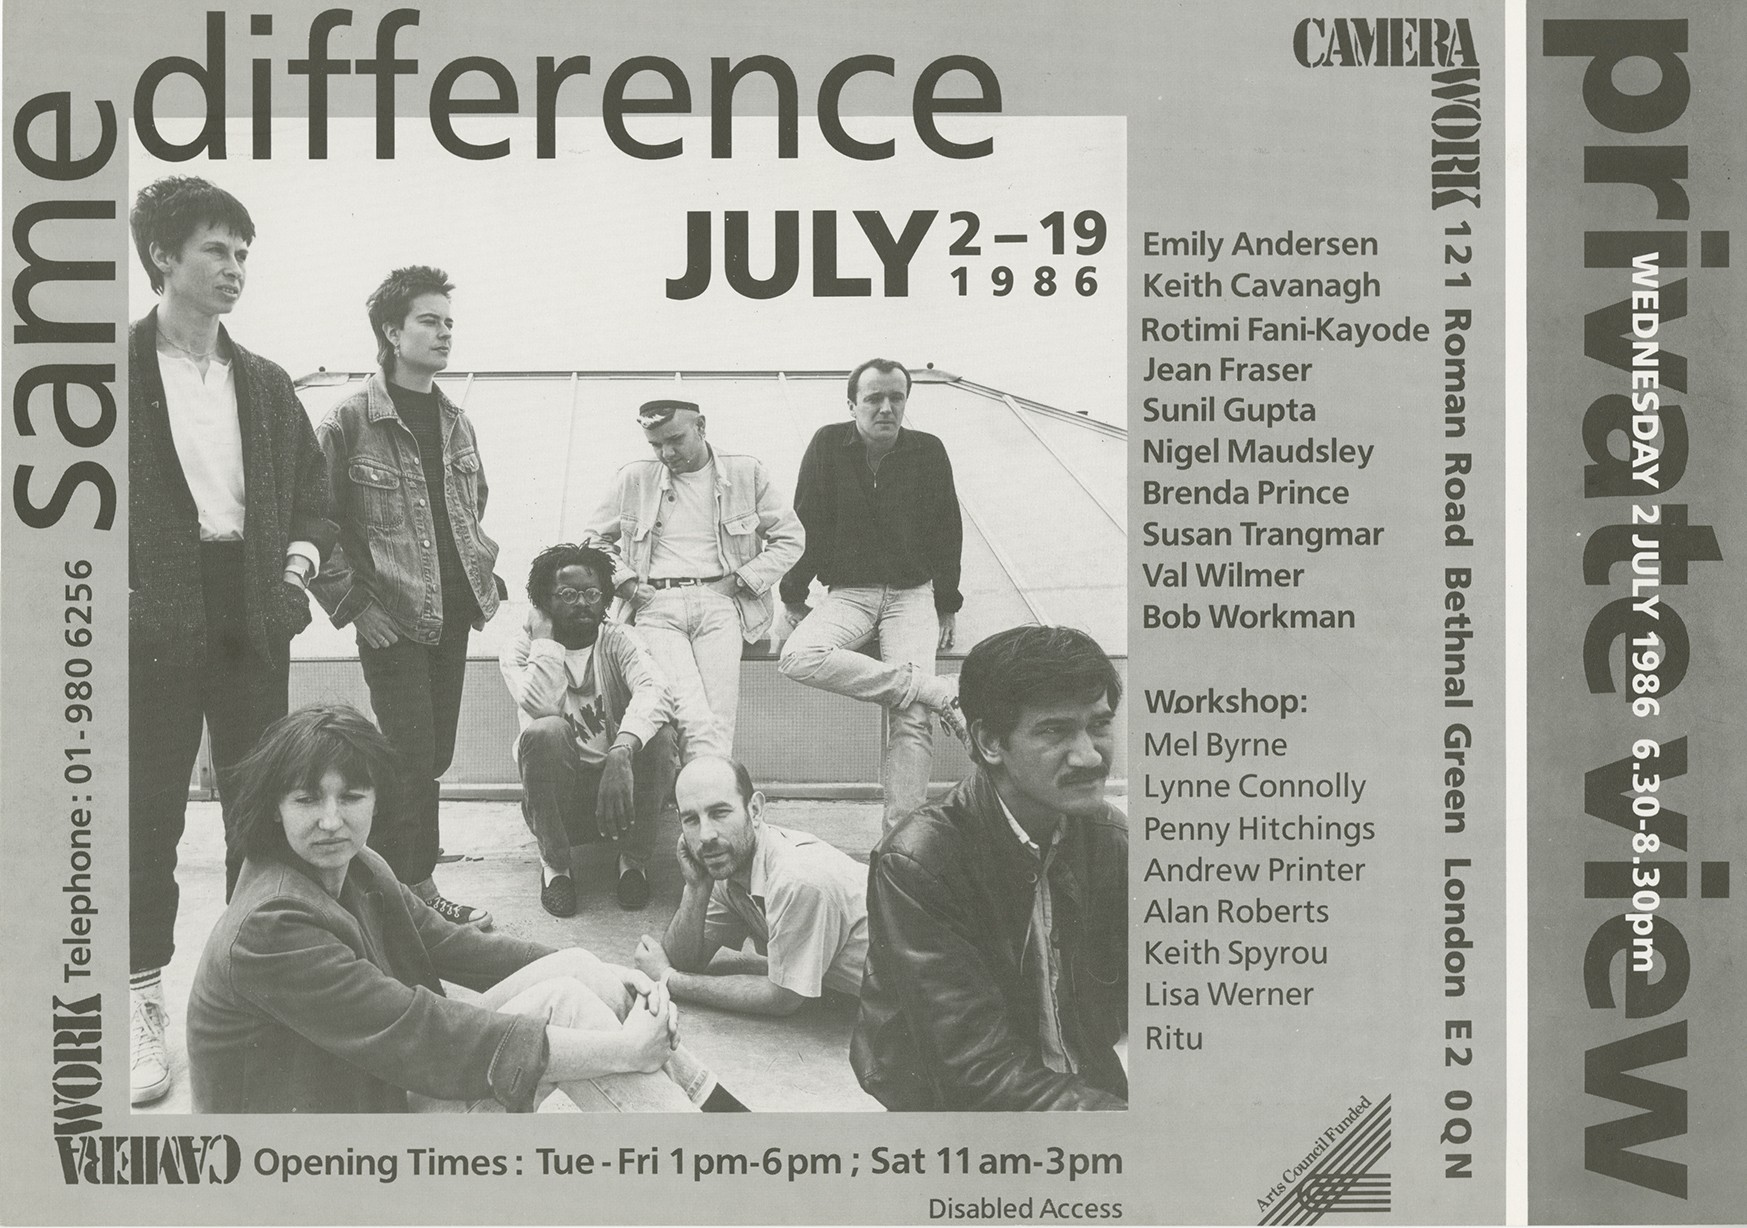 Monochrome poster for the Camerawork exhibition Same Difference. The poster features a photograph of eight people with neutral expressions, seated and standing.